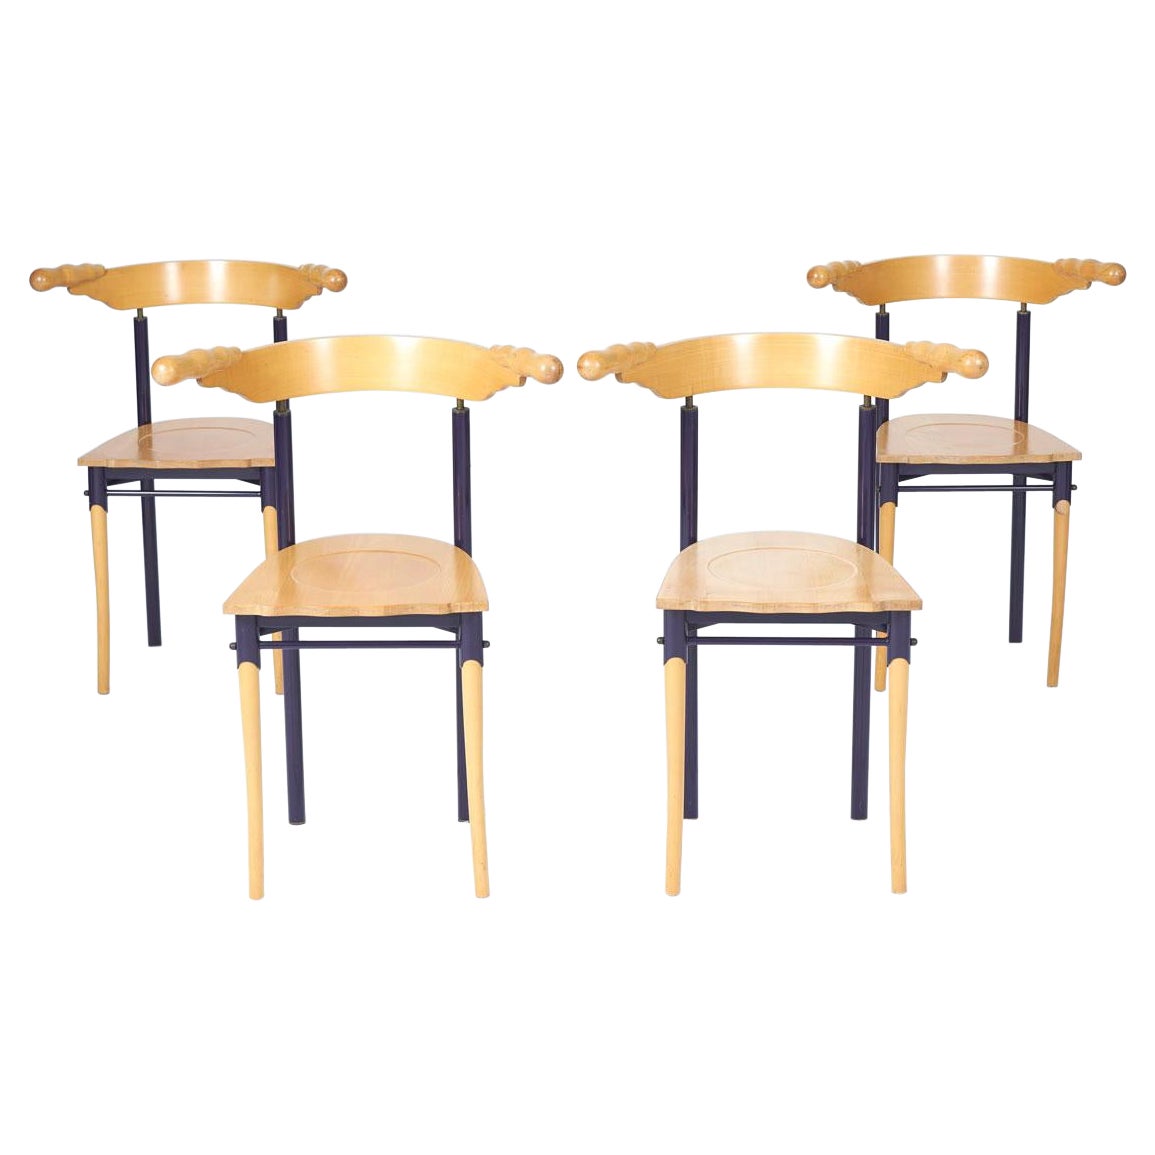 Set of 'Jansky' wooden chairs by Borek Sipek For Sale